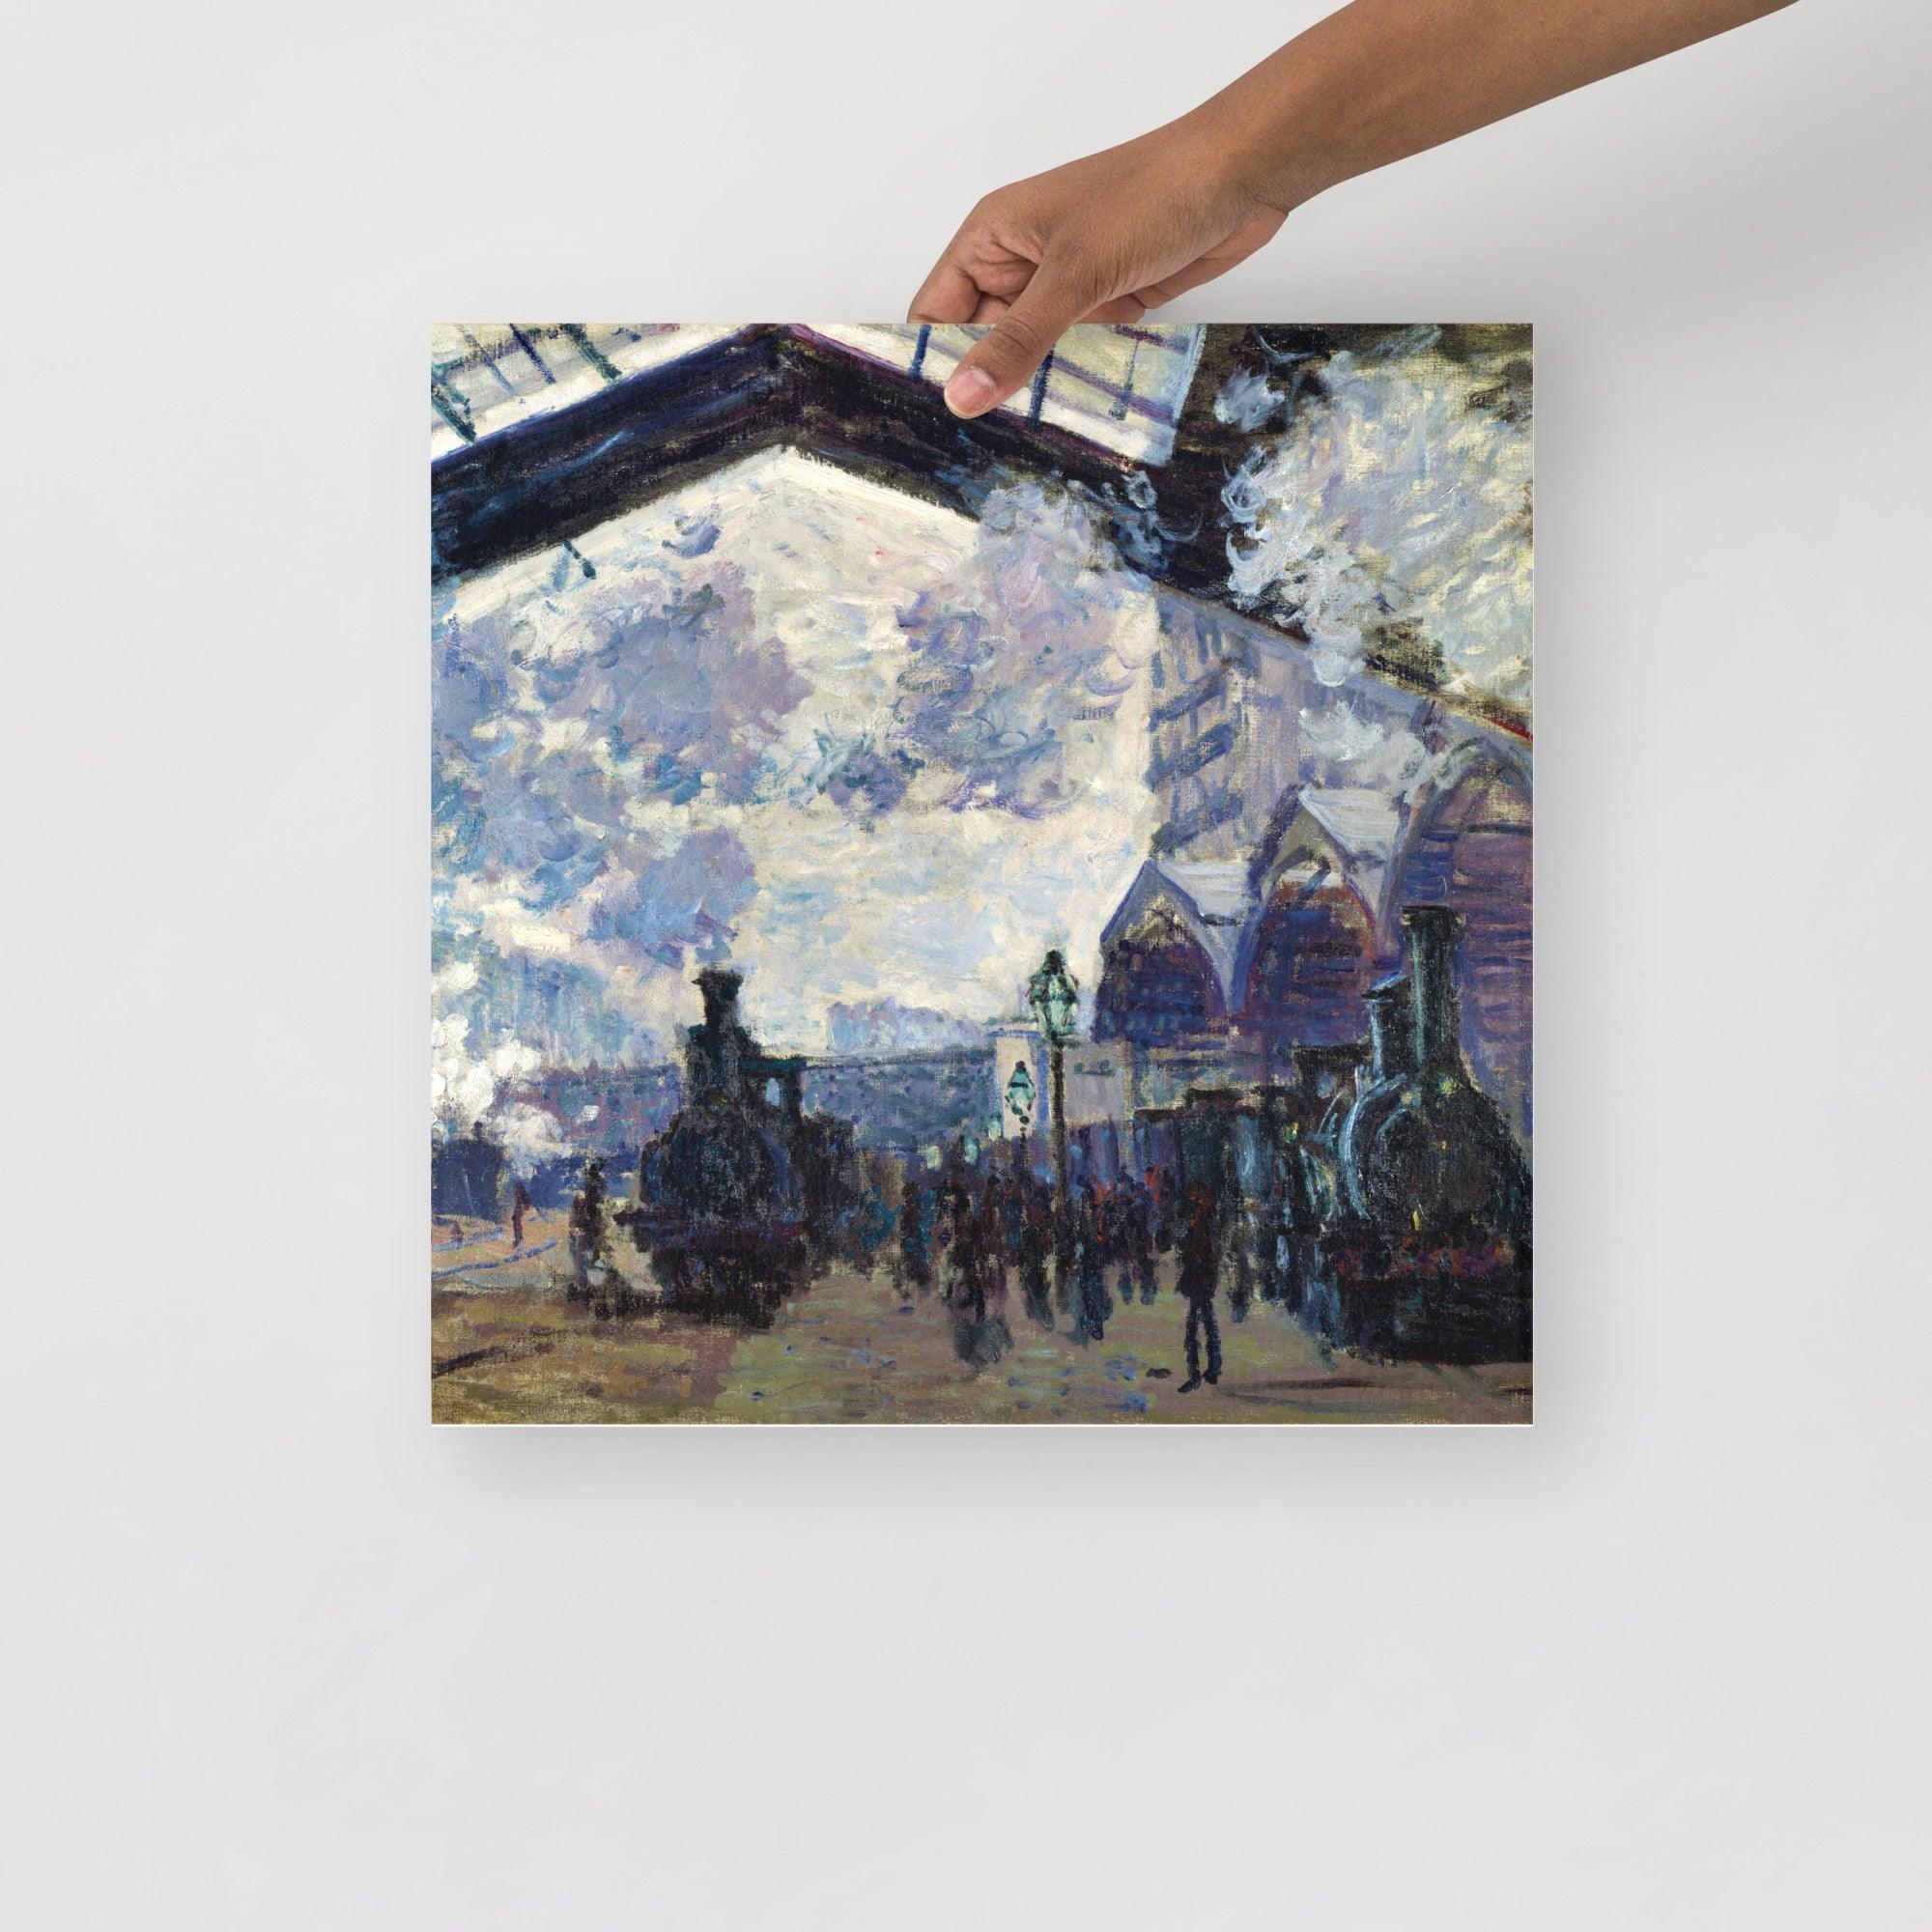 The Gare St-Lazare by Claude Monet  poster on a plain backdrop in size 16x16”.